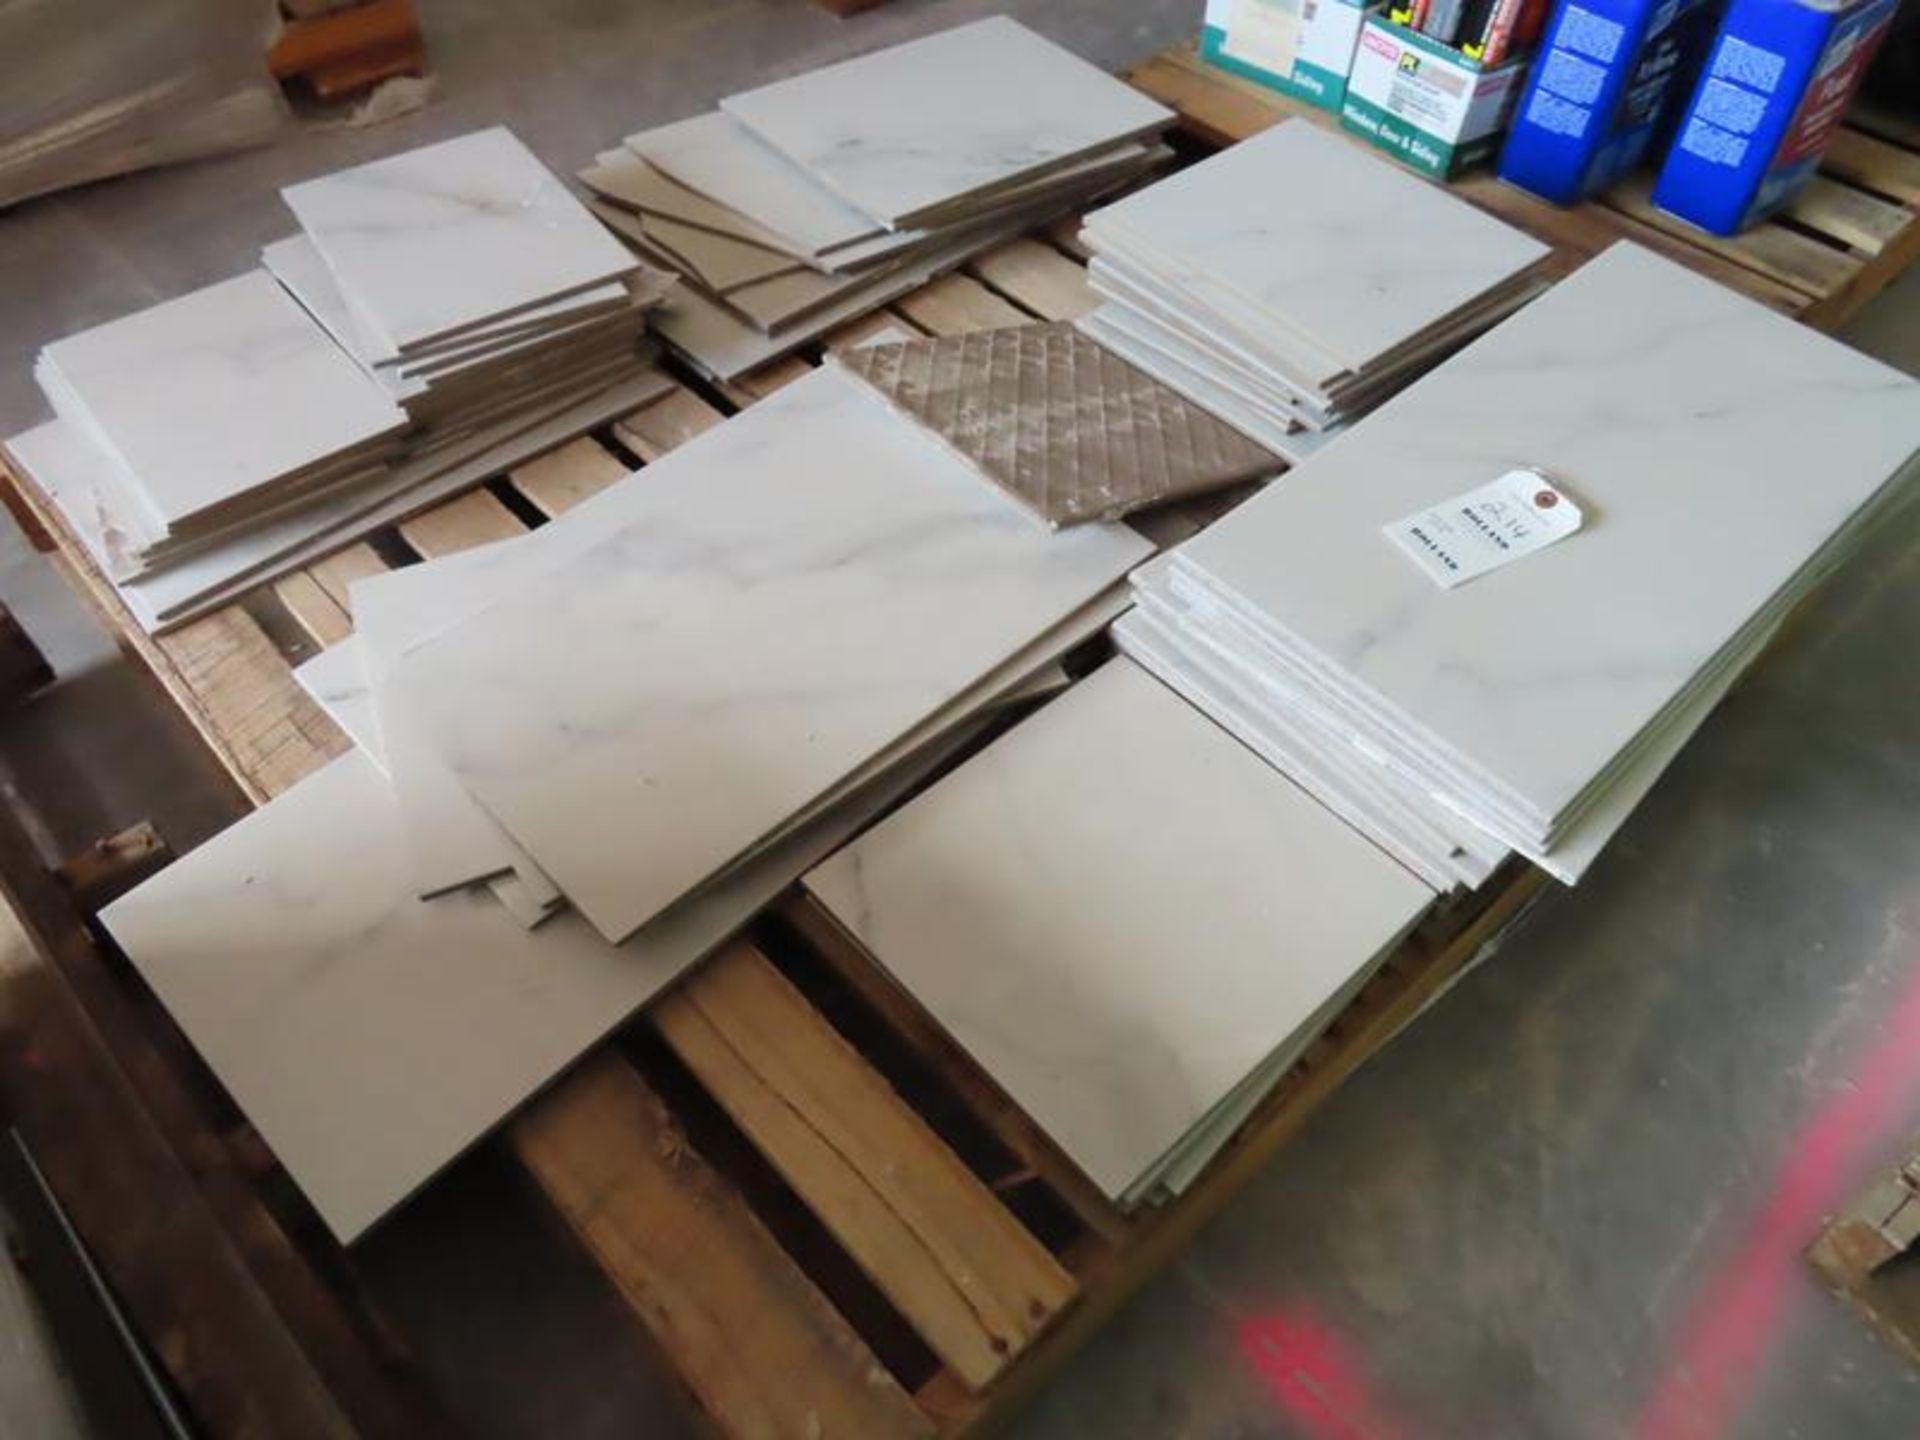 108.53 SF OF CONTESSA FLOOR TILE IN BOXES AND MISC. OPENED MATCHING TILES - Image 6 of 8